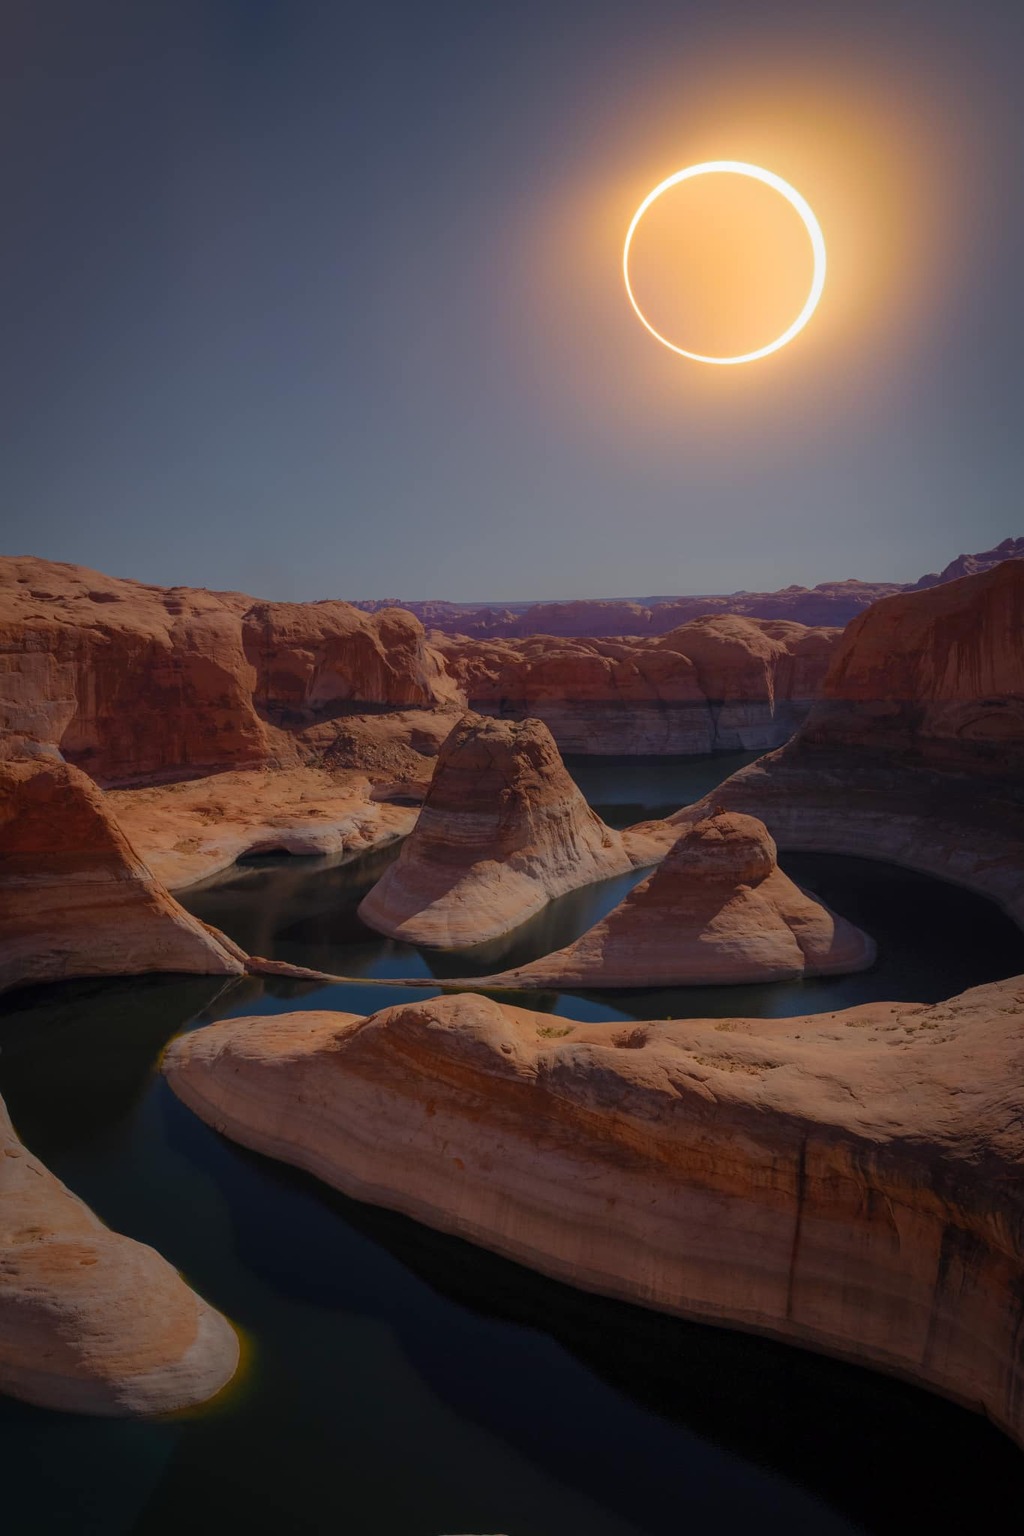 composite image taken at Reflection Canyon in Utah featuring the eclipse